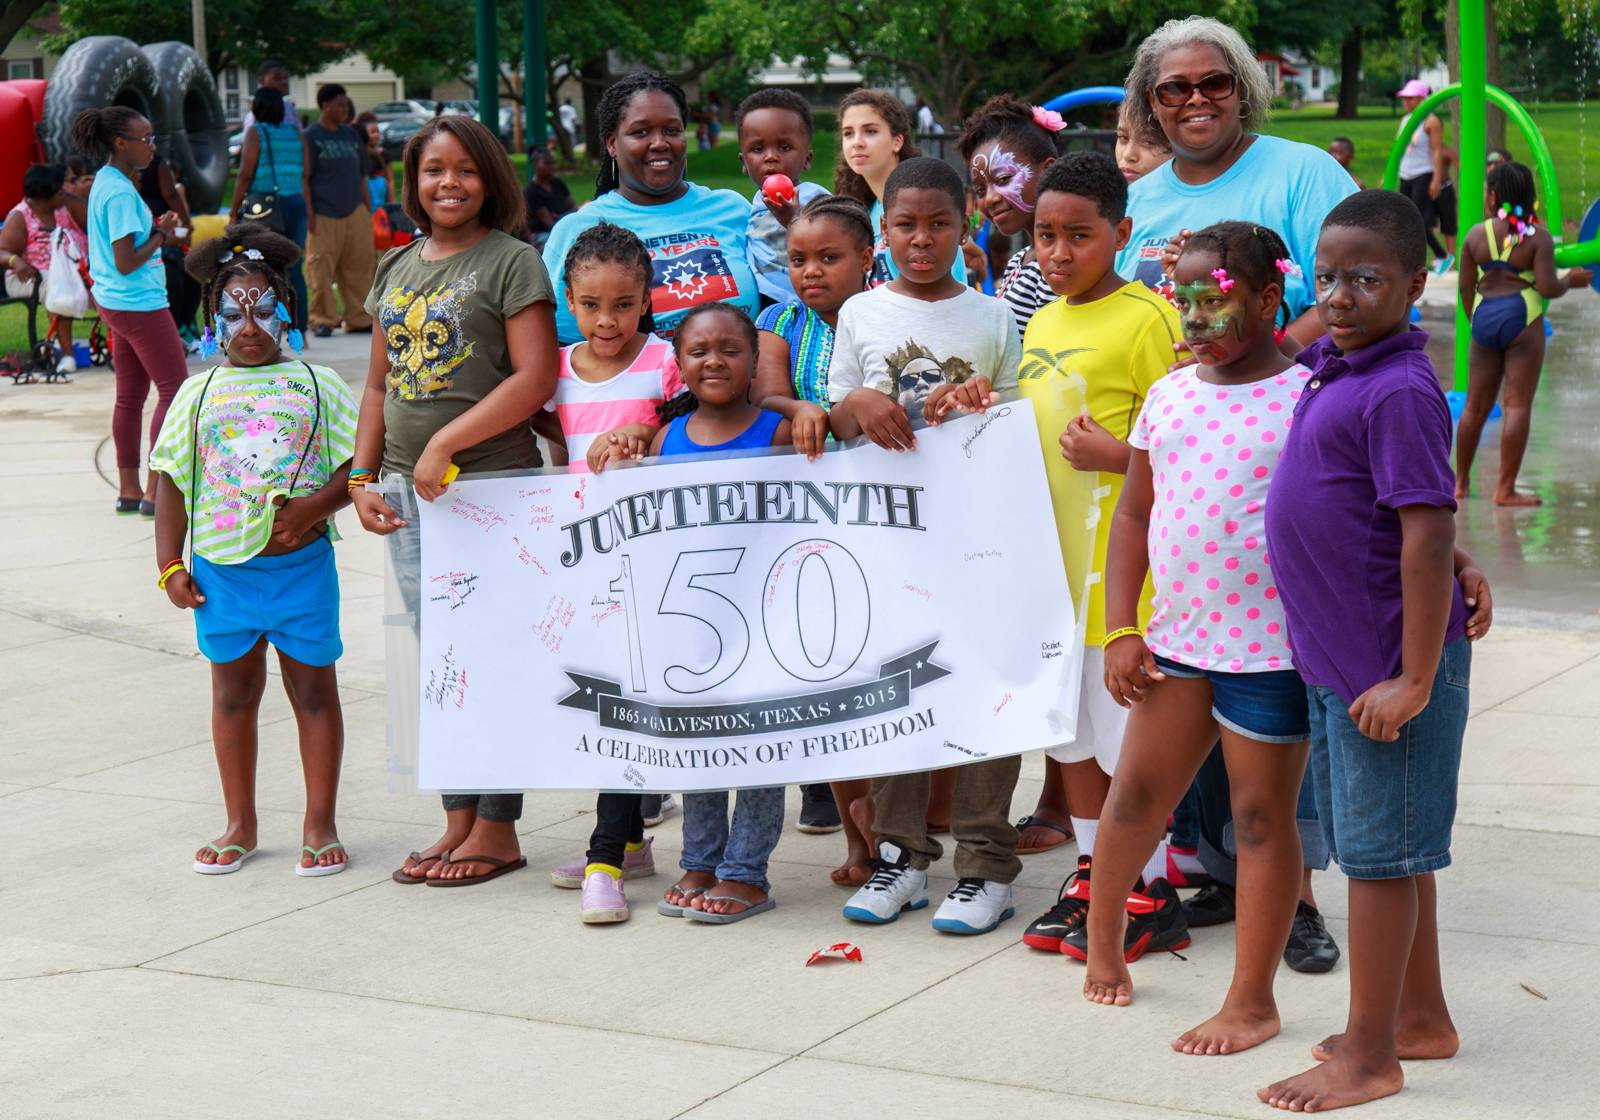 Juneteenth: A day to remember and celebrate